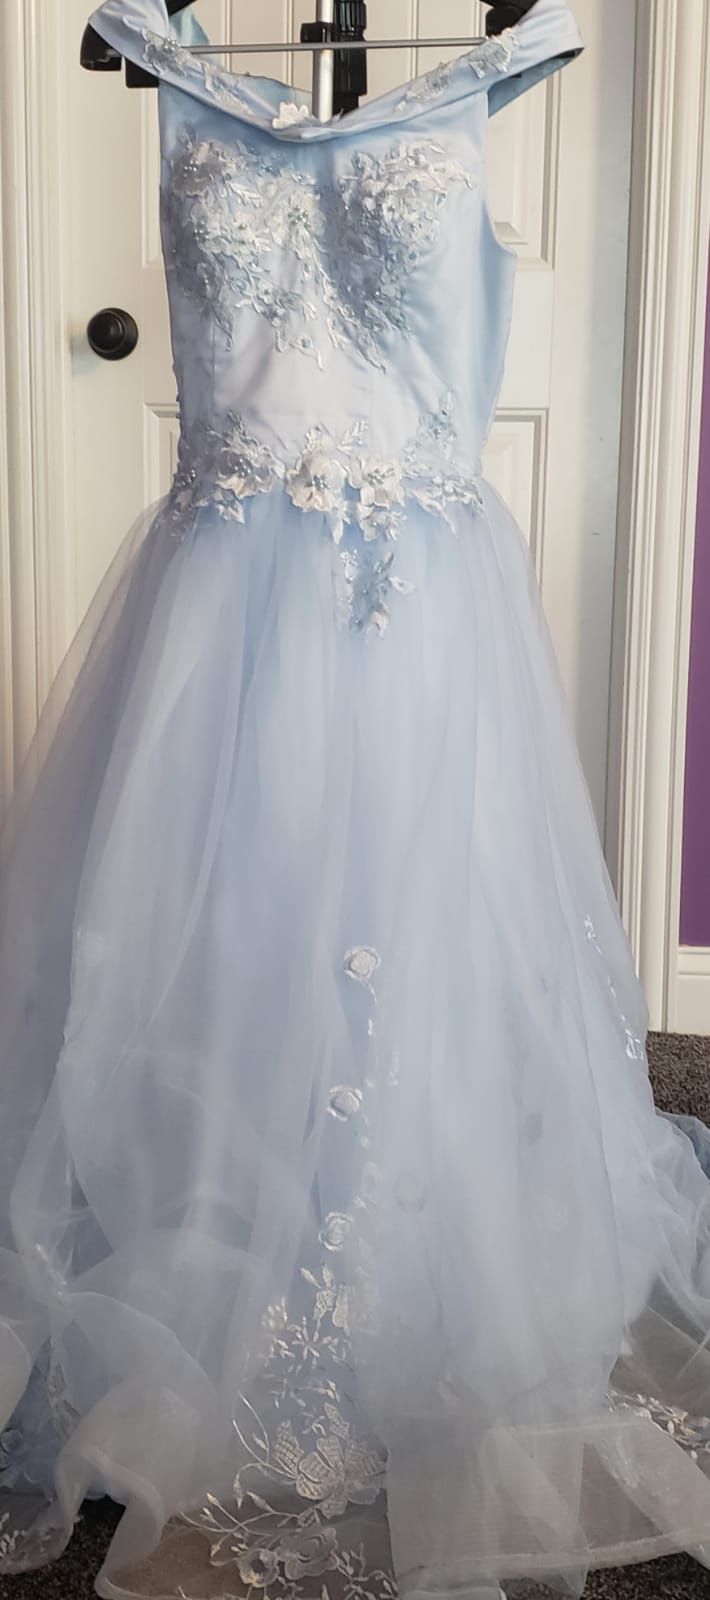 Large flower girl dress, used once Great condition cheap price sale light baby blue